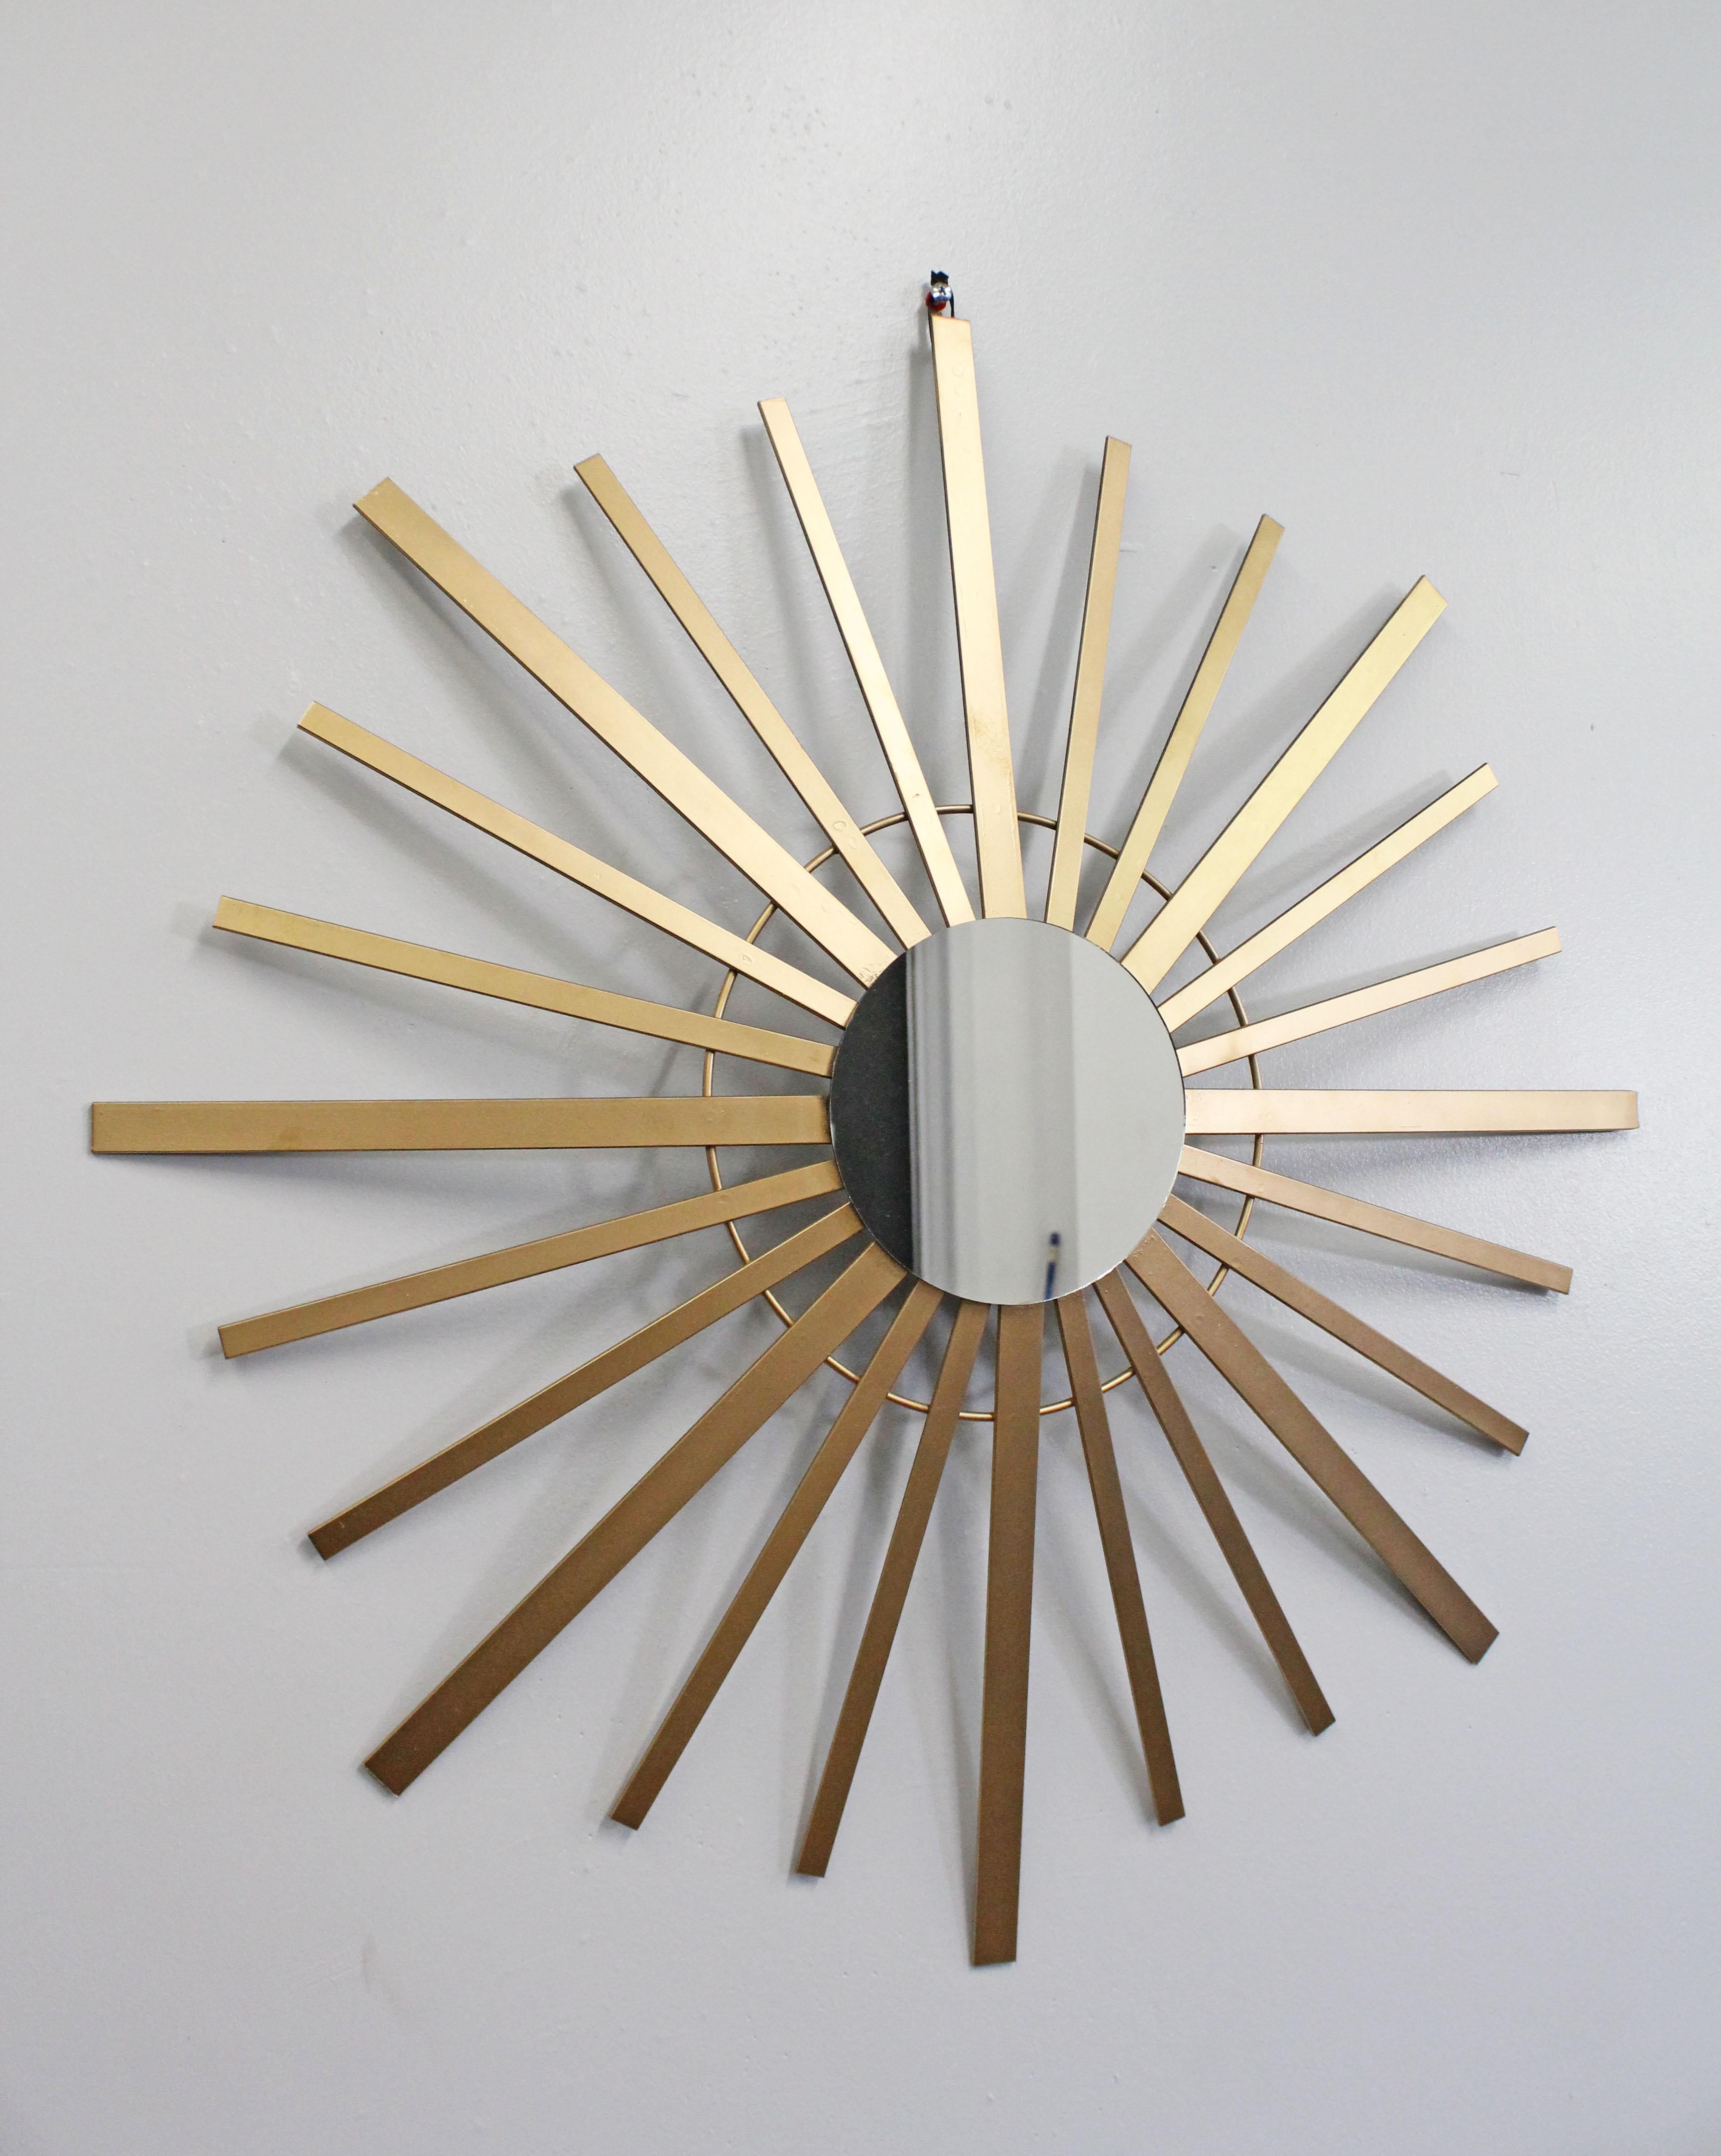 Offered is a super unique, vintage mid-century wall mirror in the shape of a 